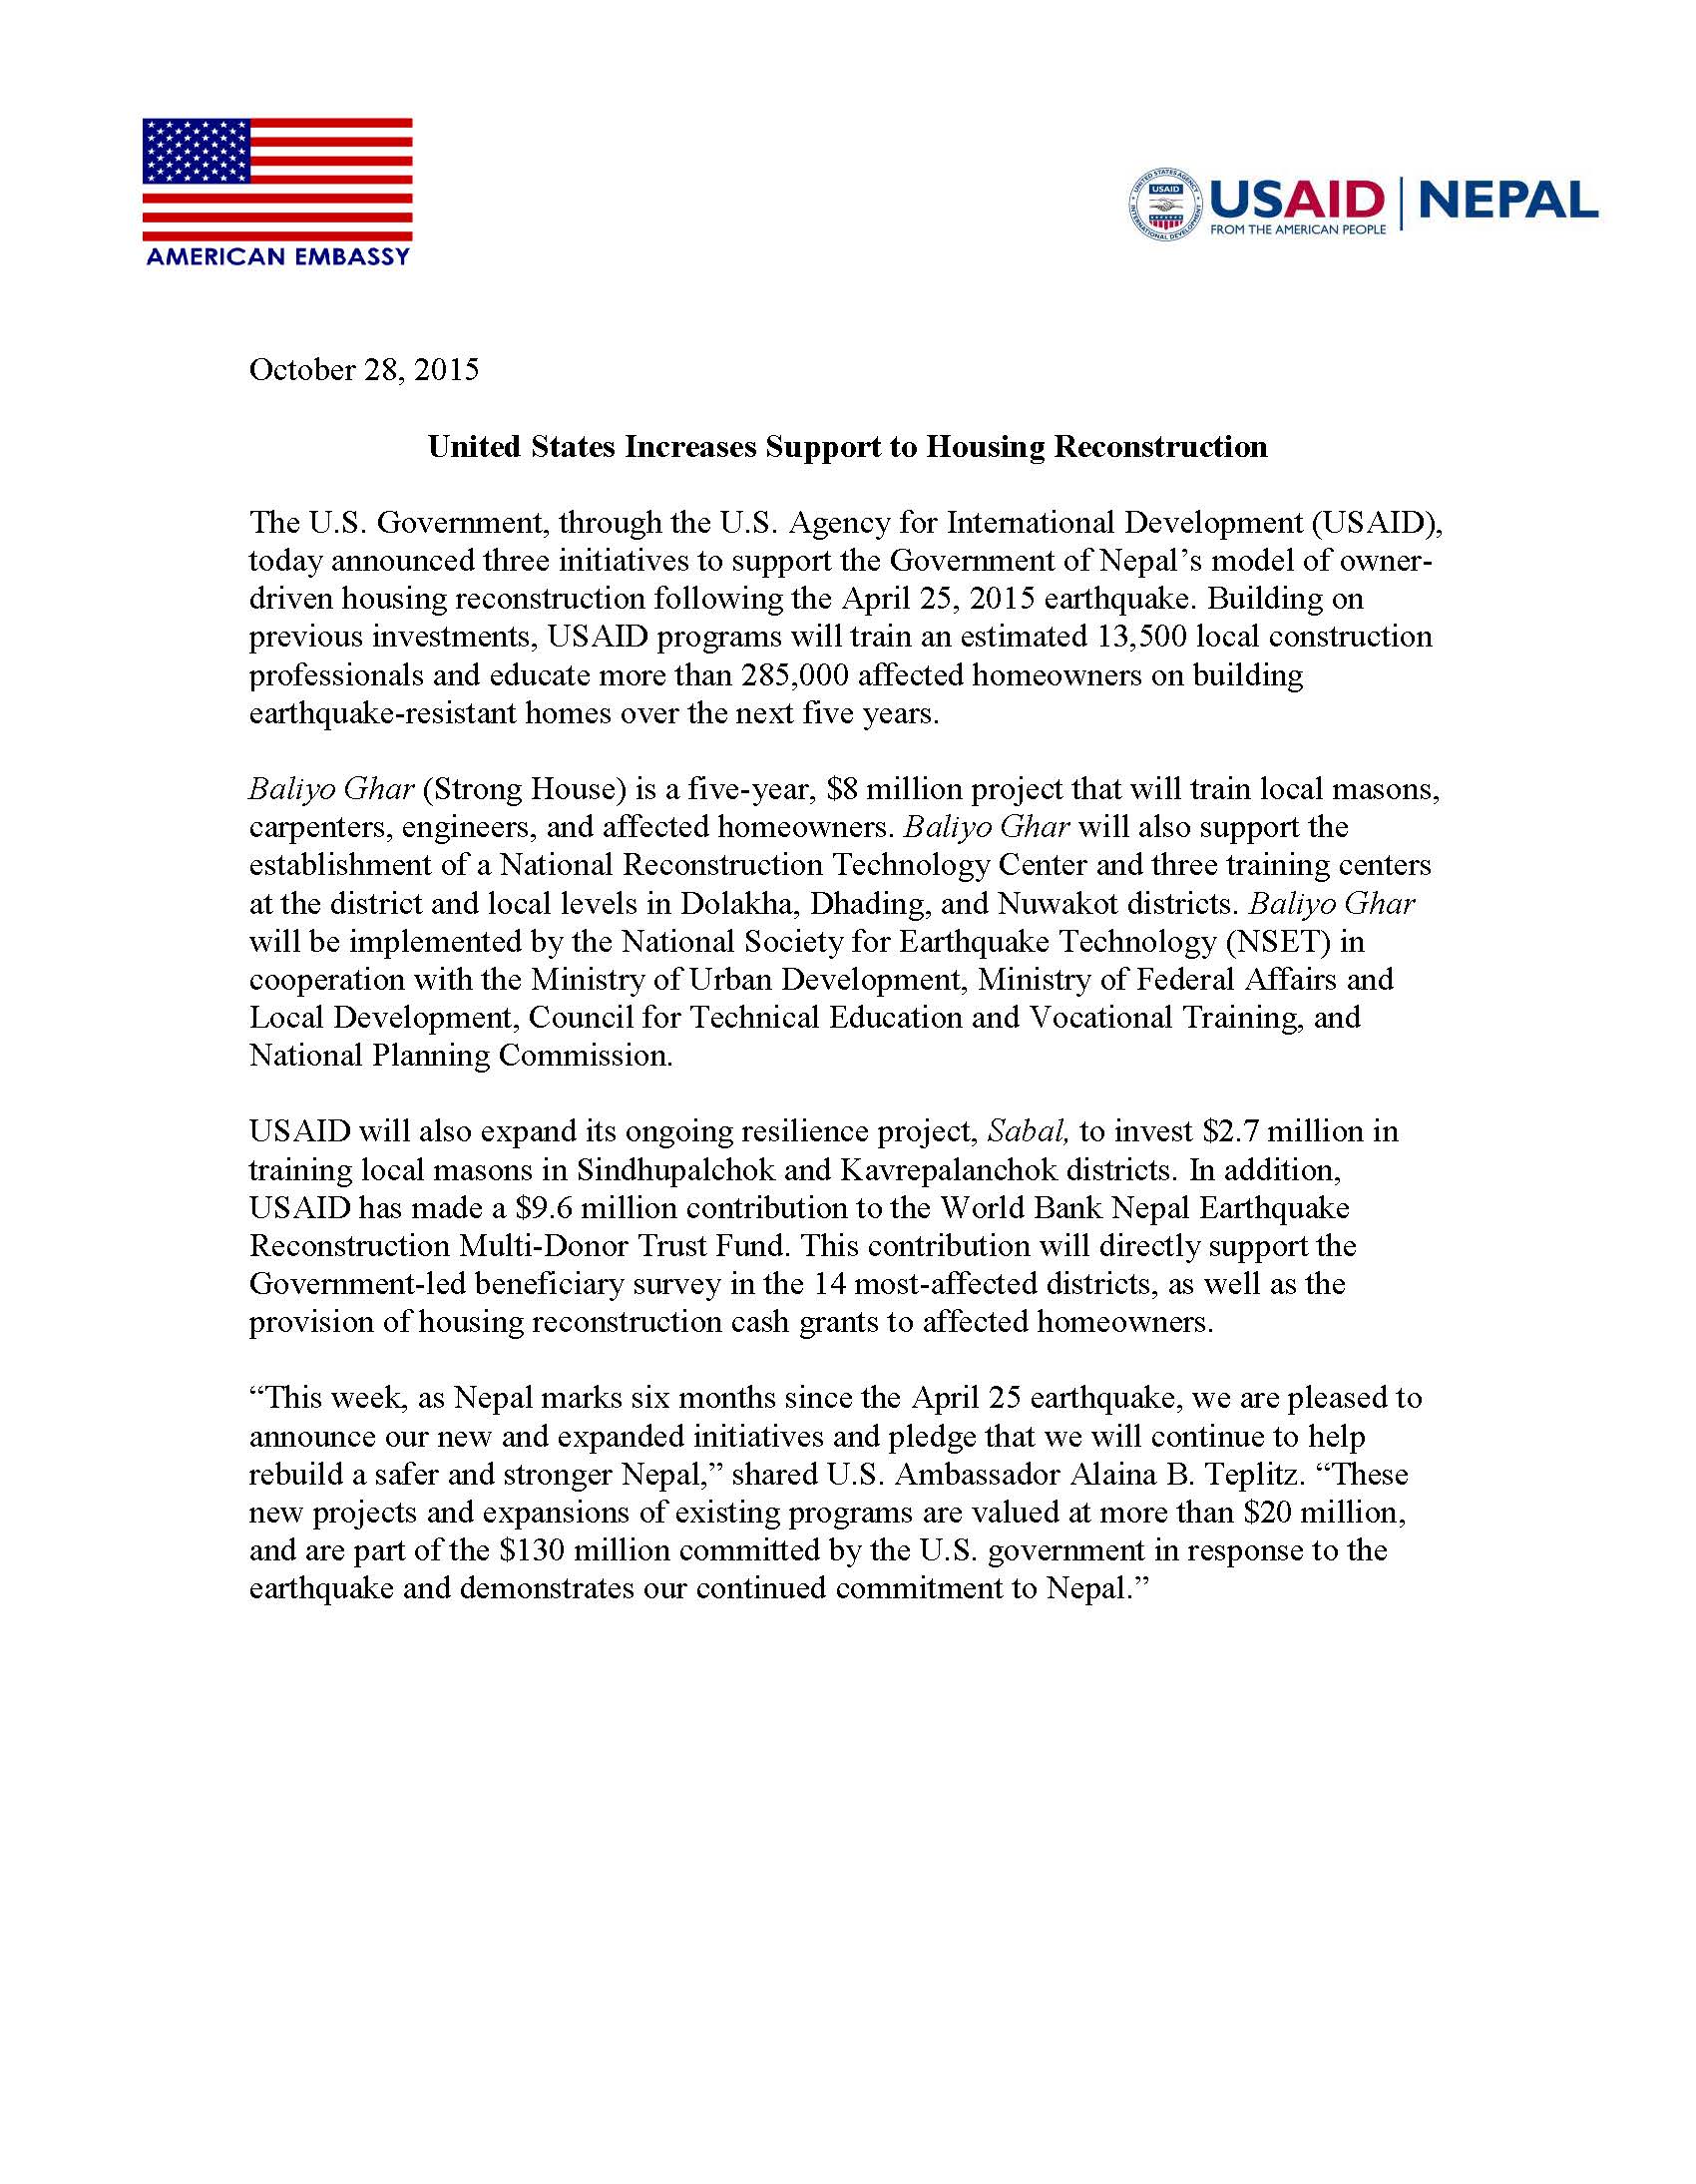 PRESS RELEASE: United States Increases Support to Housing Reconstruction